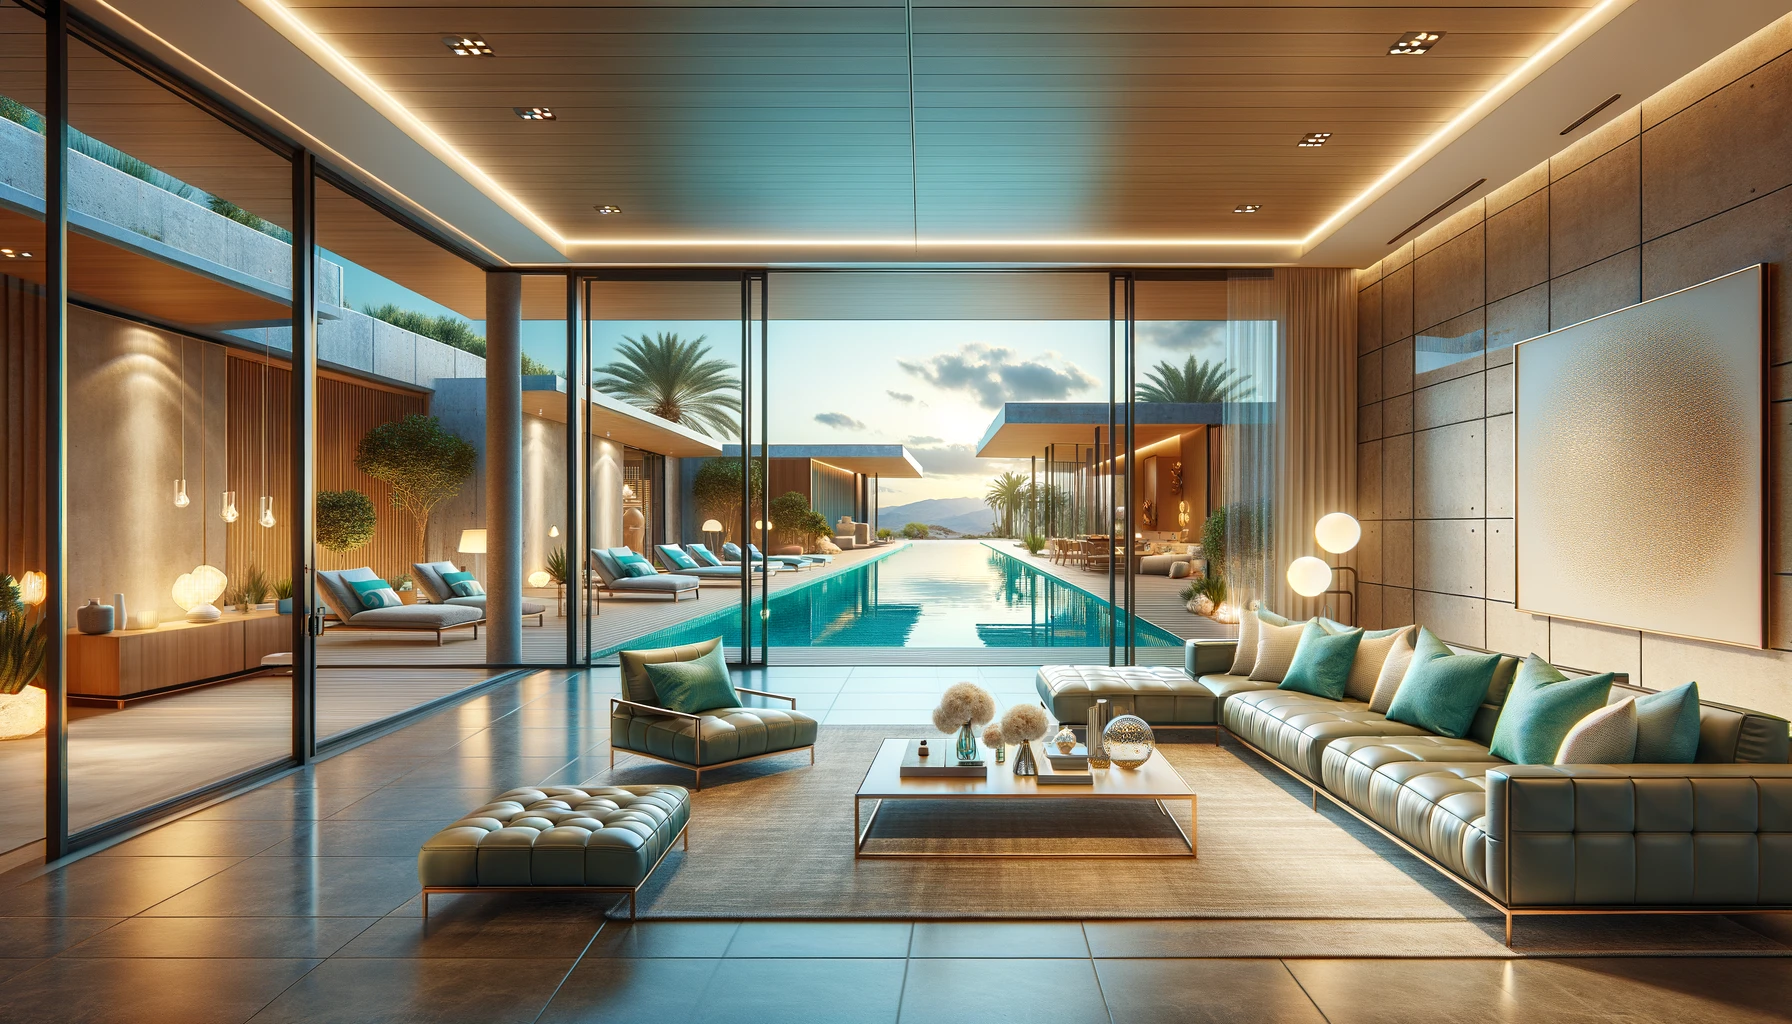 Optimize your rental listing with this image of a luxurious modern home featuring turquoise accents and an infinity pool, set against a desert landscape in a 16:9 format.